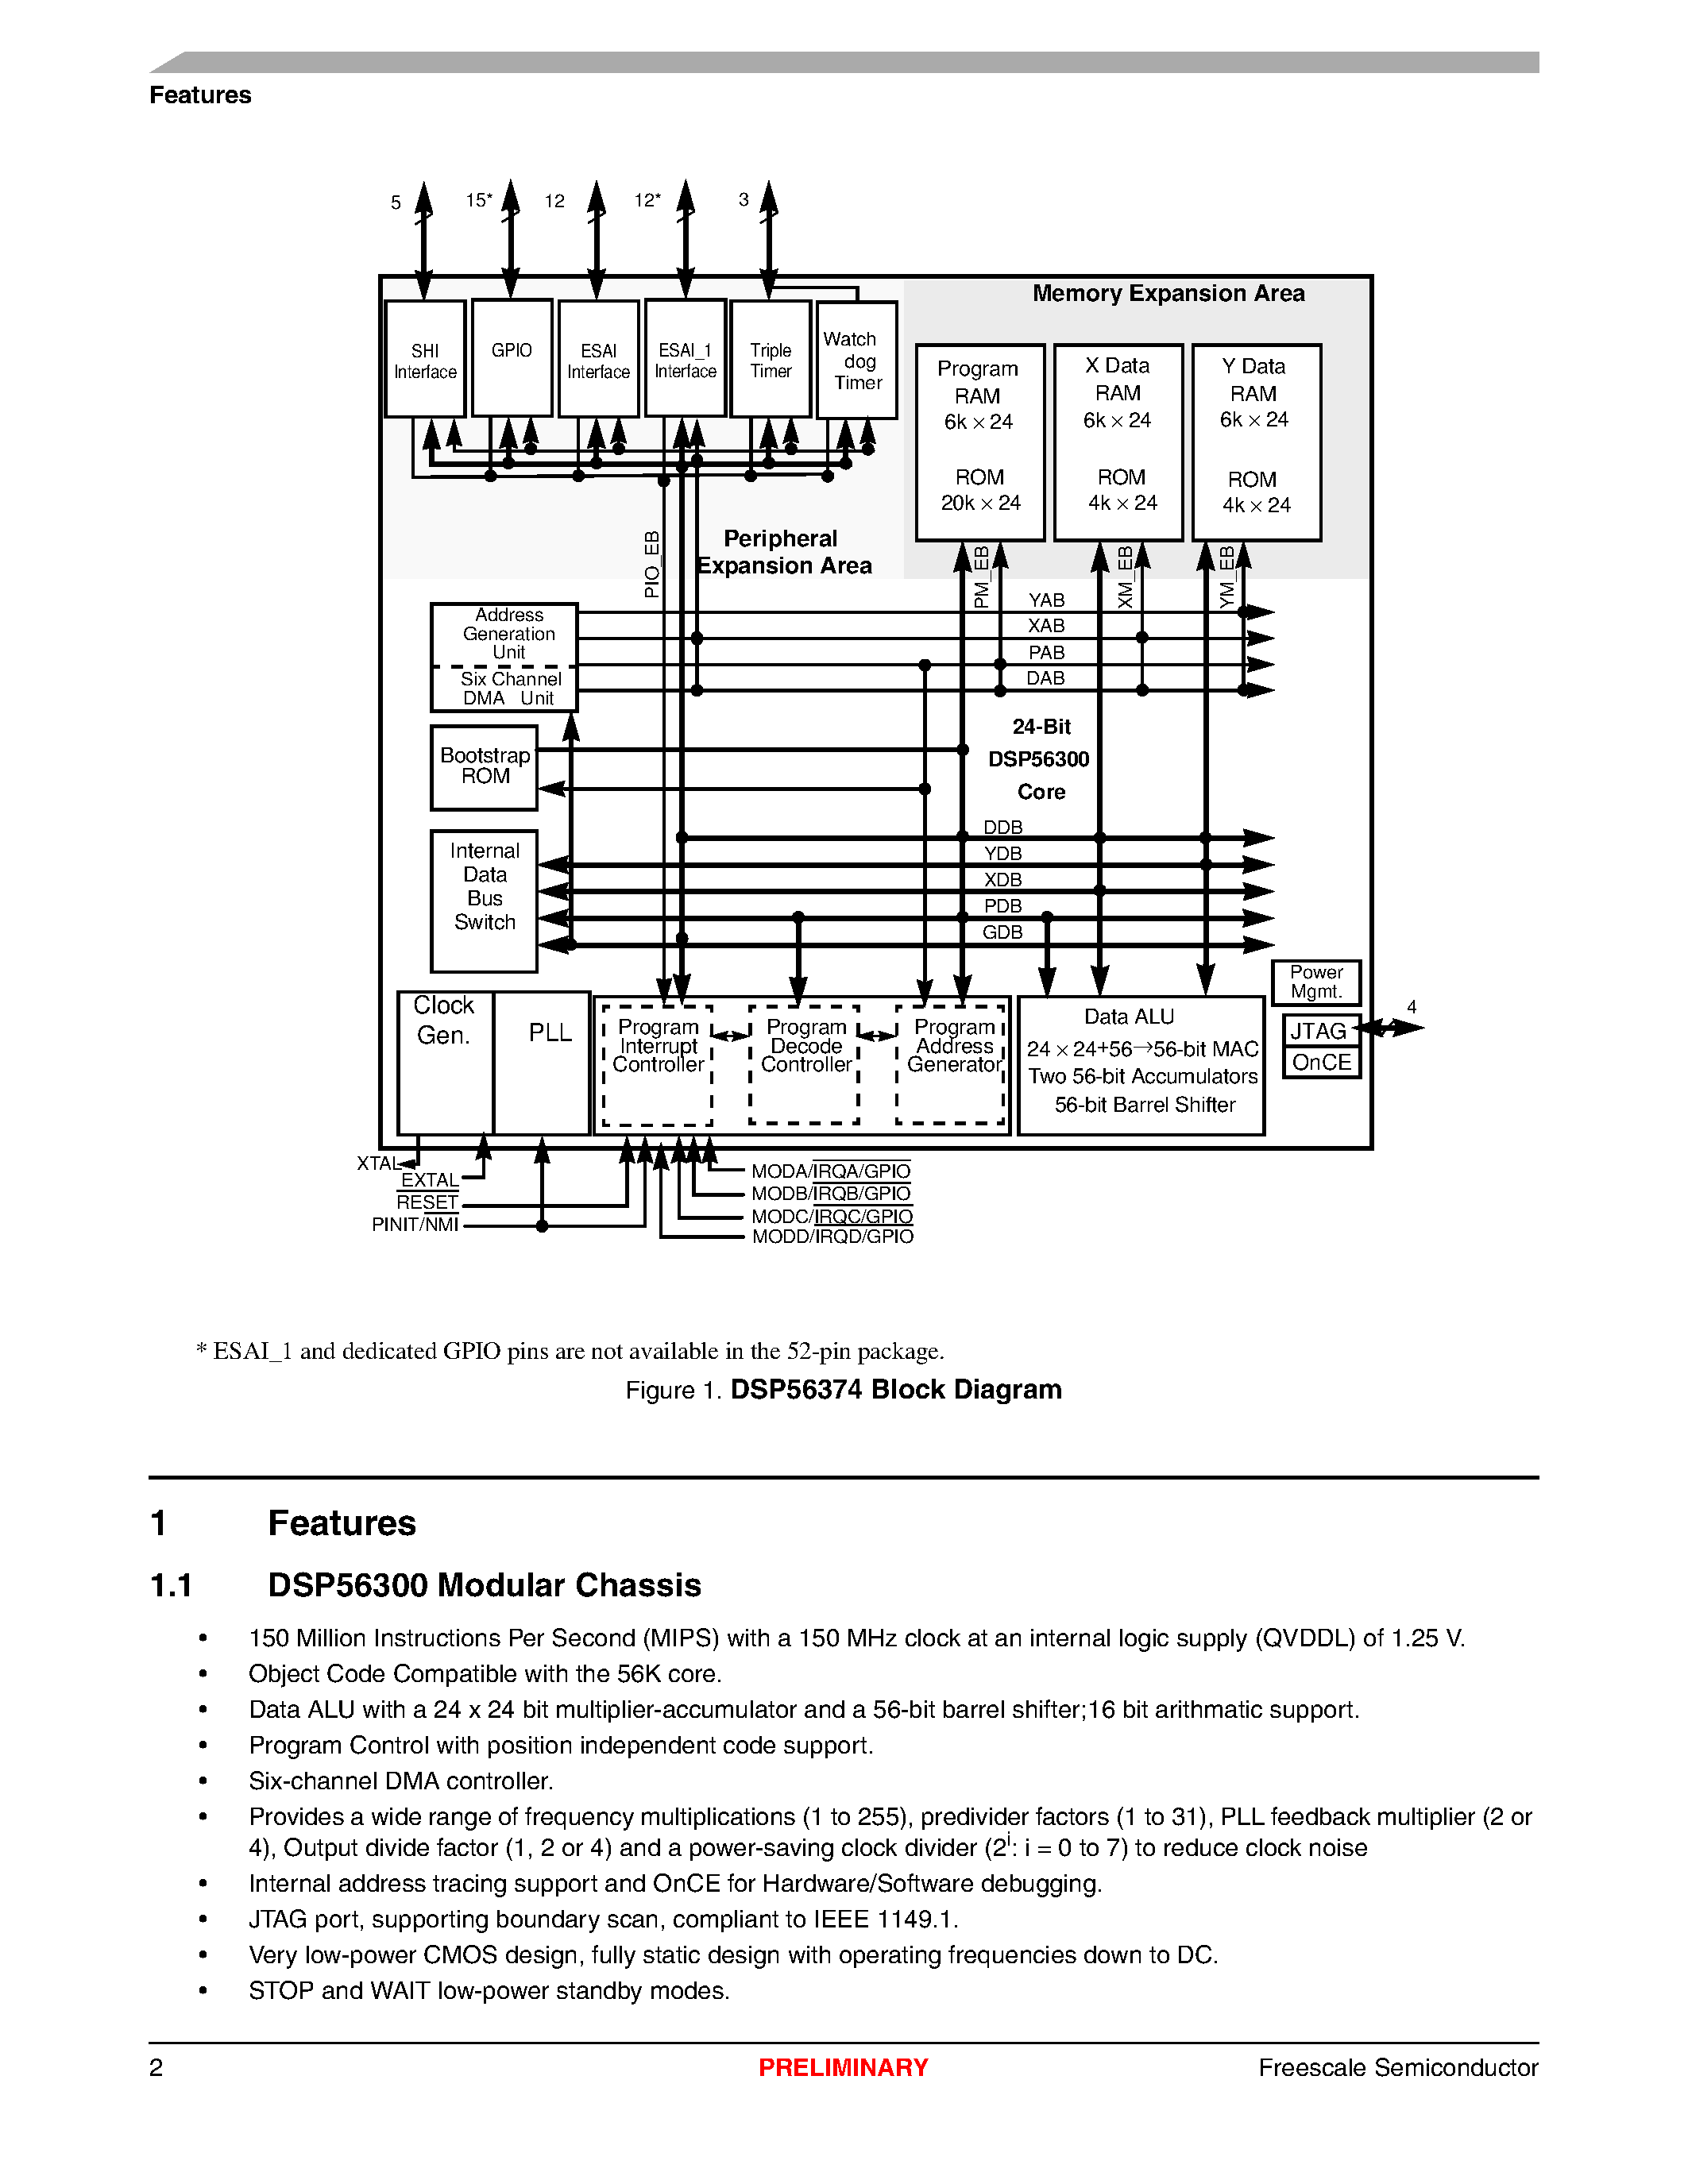 Datasheet DSP56374UM/D - high density CMOS device with 3.3 V inputs and outputs page 2